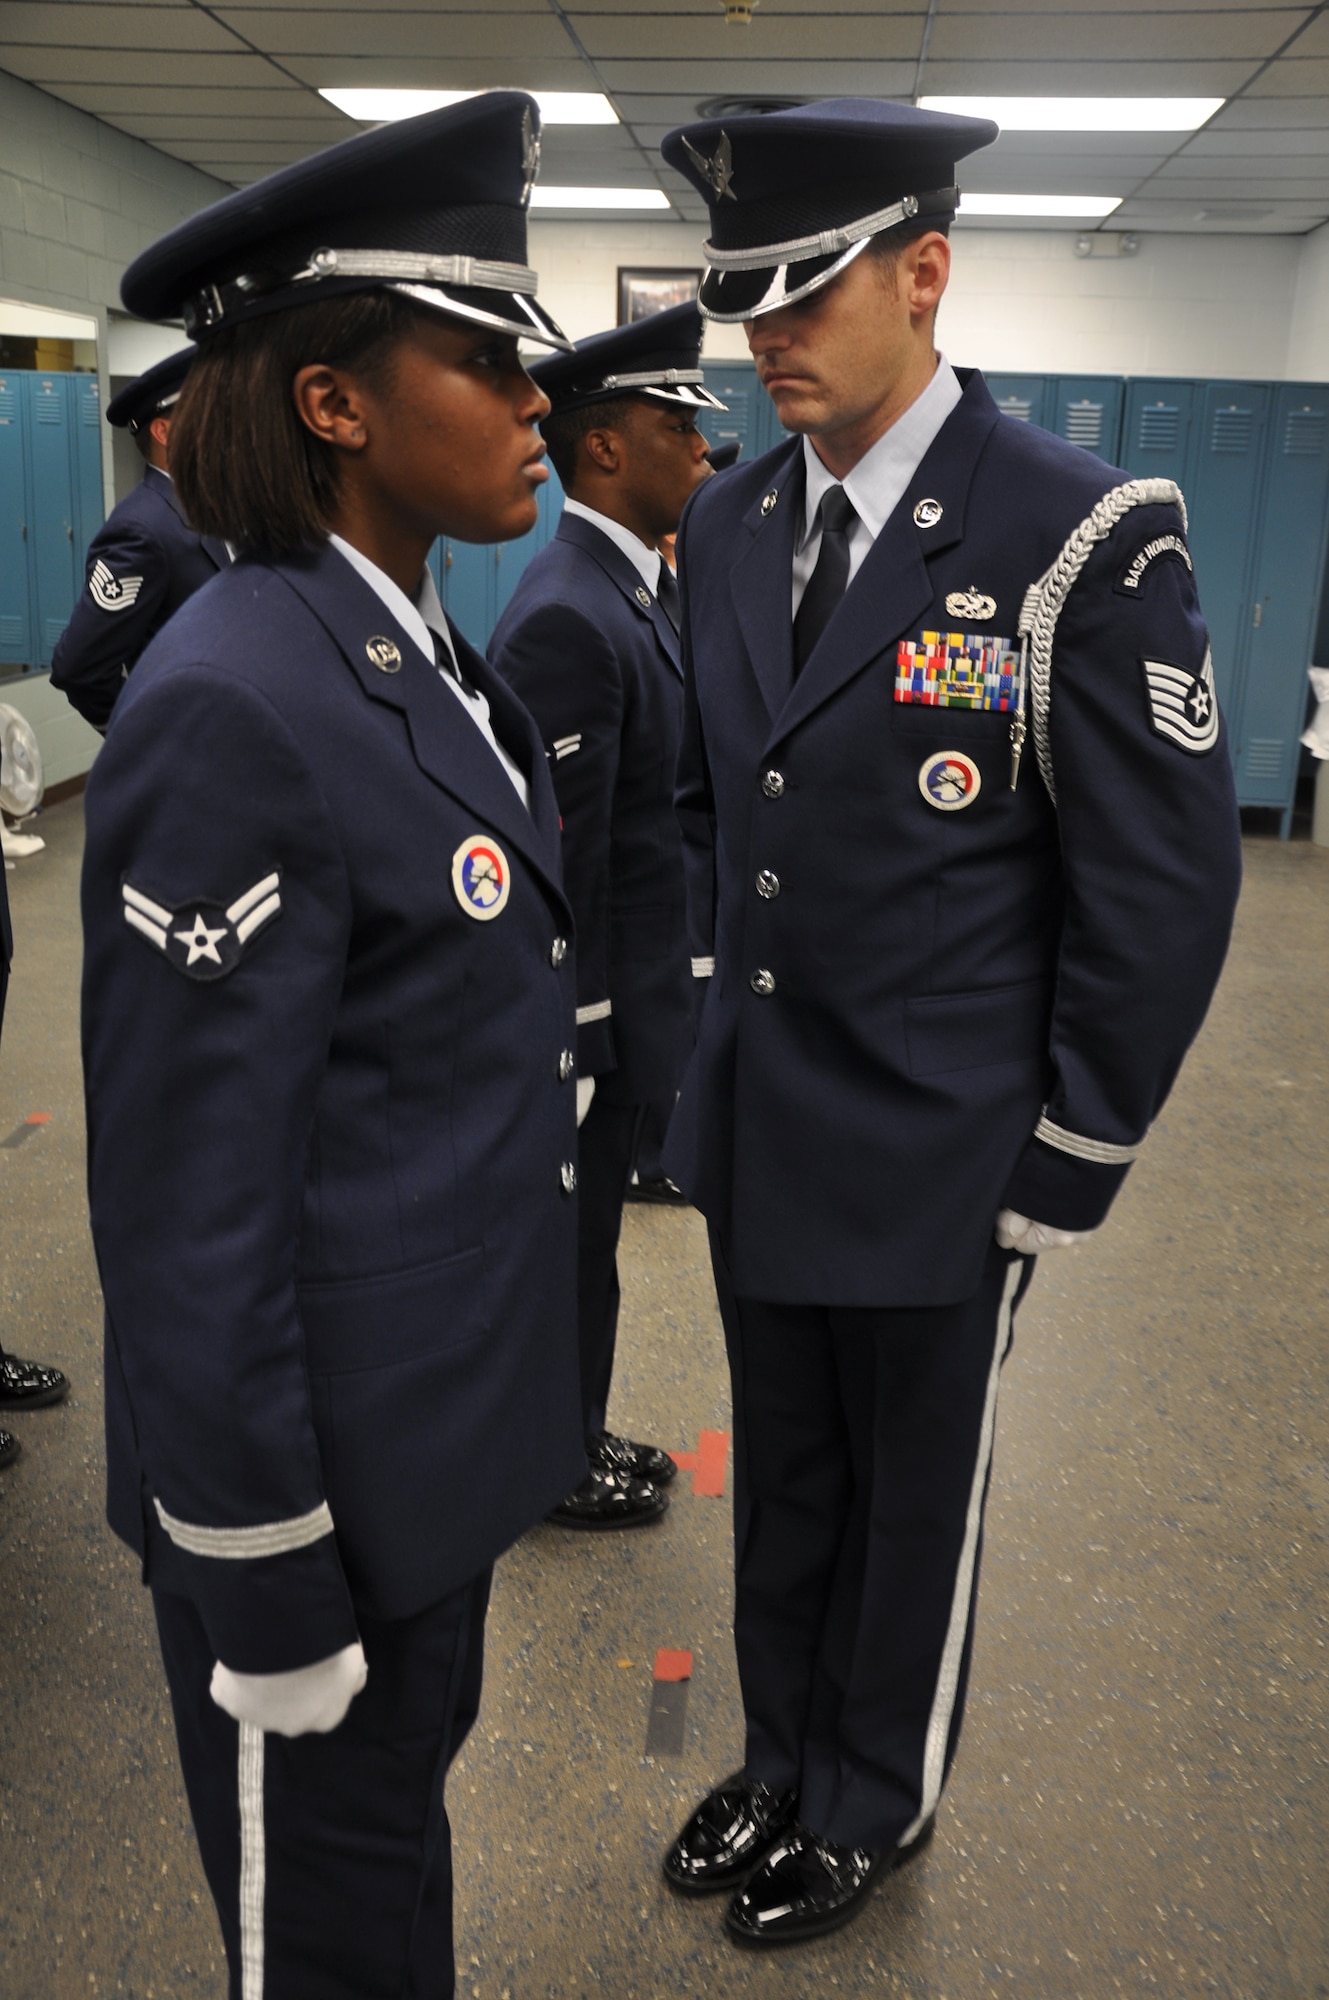 EGLIN AIR FORCE BASE, Fla. -- Tech. Sgt. Troy Kiick, Eglin Honor Guard NCOIC, inspects the uniform of Airman 1st Class Brittany Polk, a senior honor guard member. The uniform inspections take place before the honor guard members report to perform at a ceremony, along with other preparations such as a dress rehearsal. (U.S. Air Force photo by Airman 1st Class Anthony Jennings)